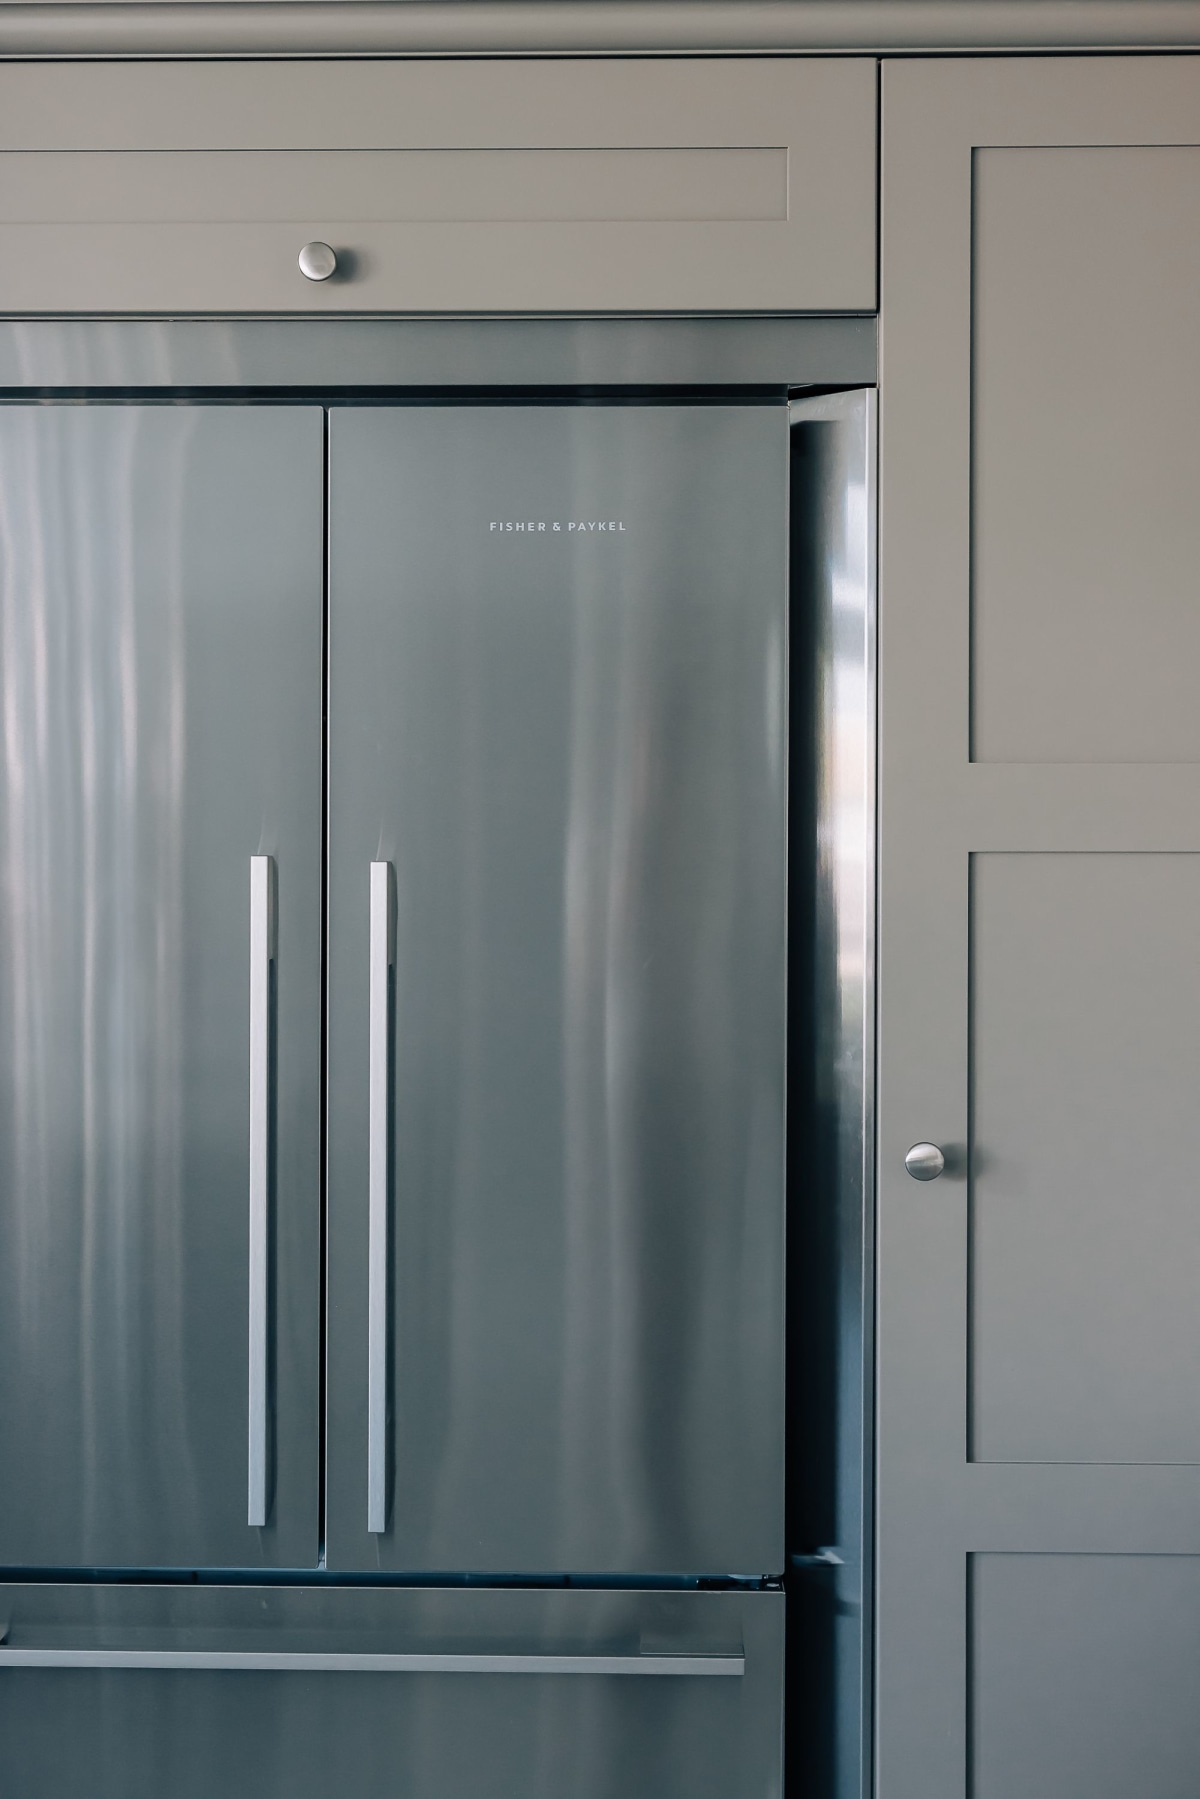 A Stainless Steel Fisher and Paykel American Fridge Freezer built in to a shaker kitchen